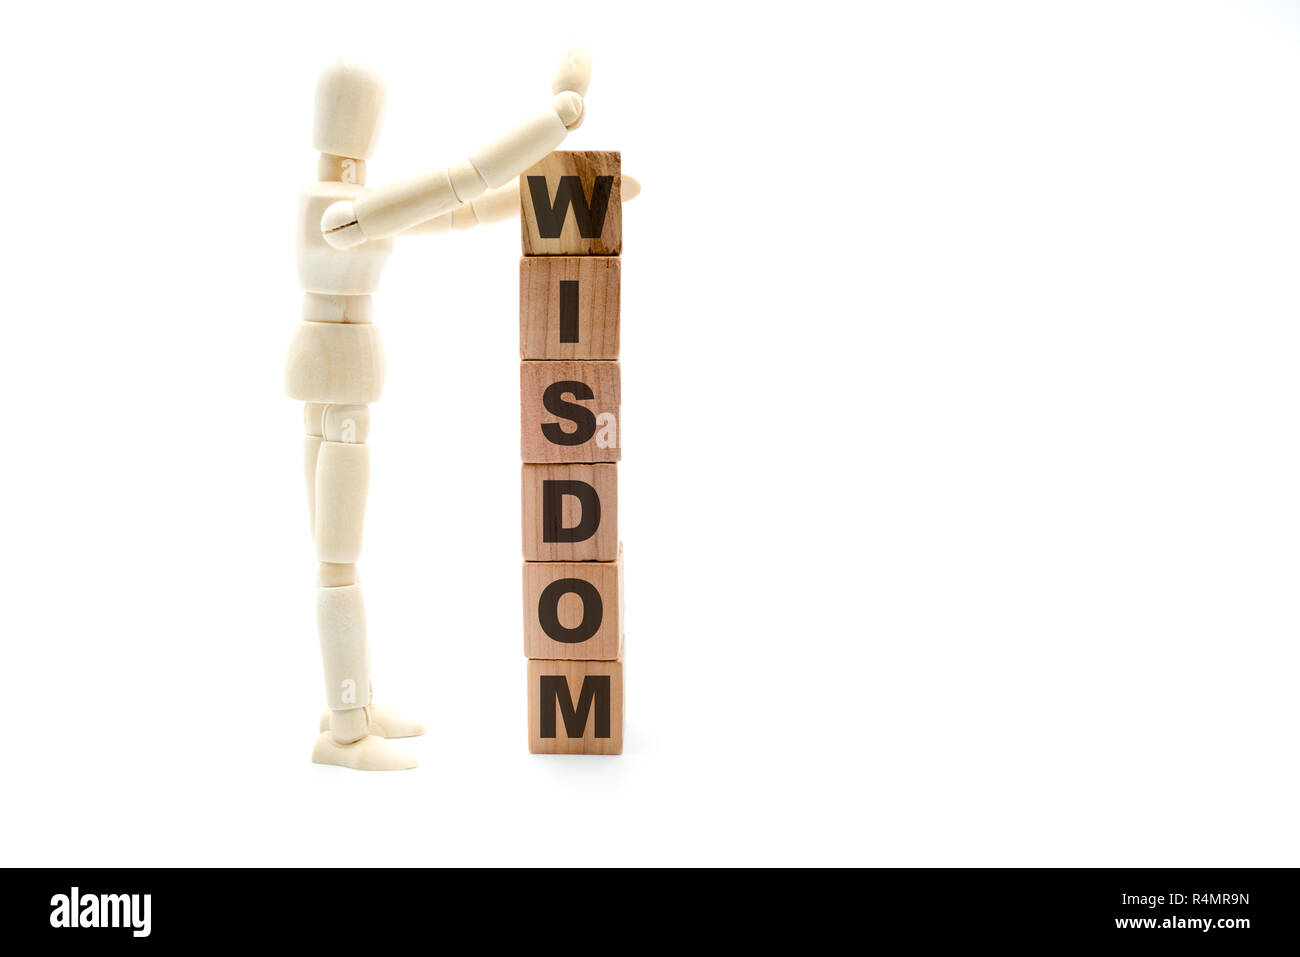 Wooden figure as businessman building Wisdom as tower of wood cubes, isolated on white background, minimalist concept Stock Photo